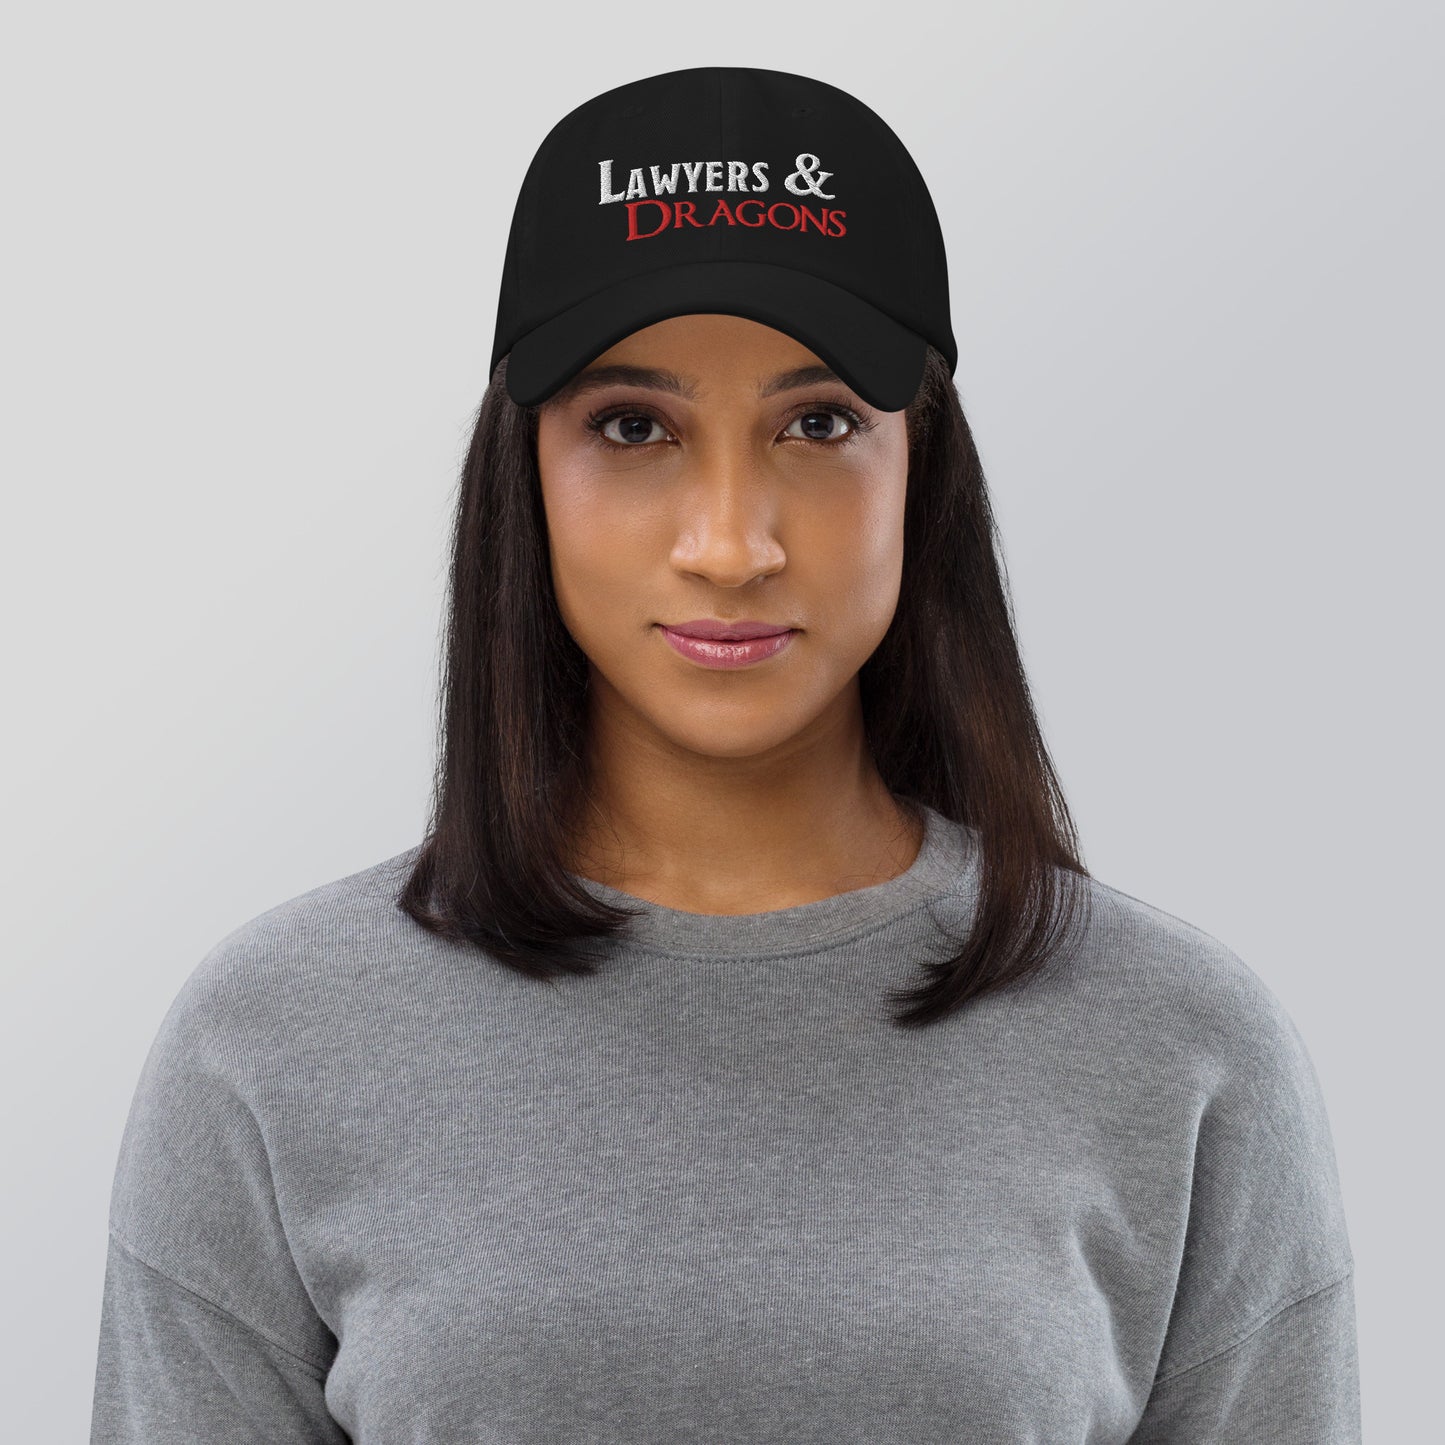 Lawyers & Dragons - Logo Title ADJUSTABLE Hat - *NEW COLORS ADDED*